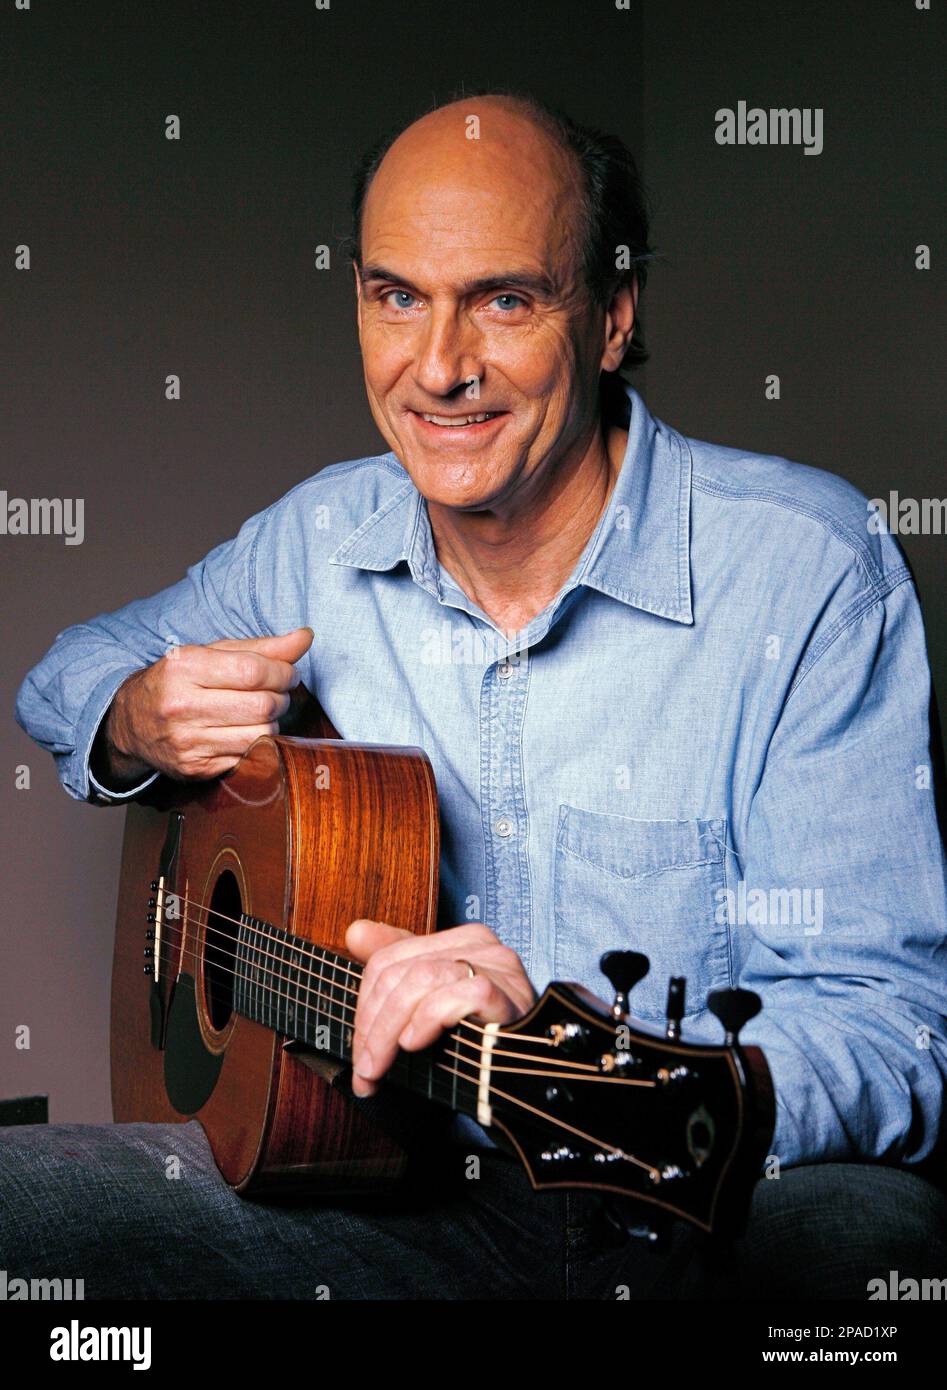 FILE ** Musician James Taylor poses with his guitar Nov. 13, 2007, at the  NBC Studios in Burbank, Calif. James Taylor's CD/DVD set "One Man Band" is  a musical self-portrait that